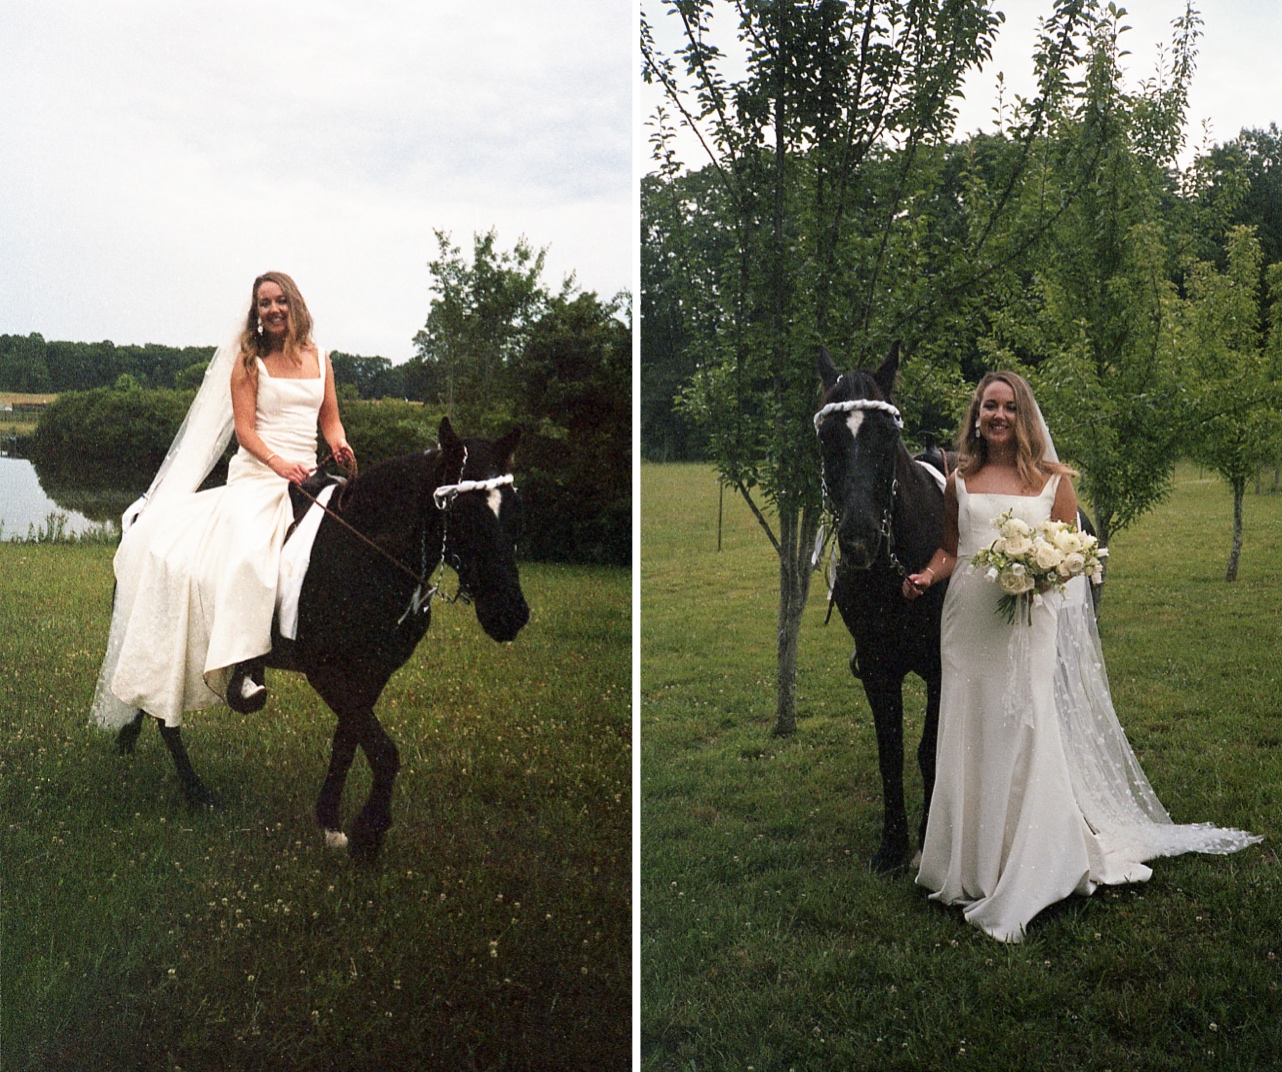 The bride poses on the back of her black horse.